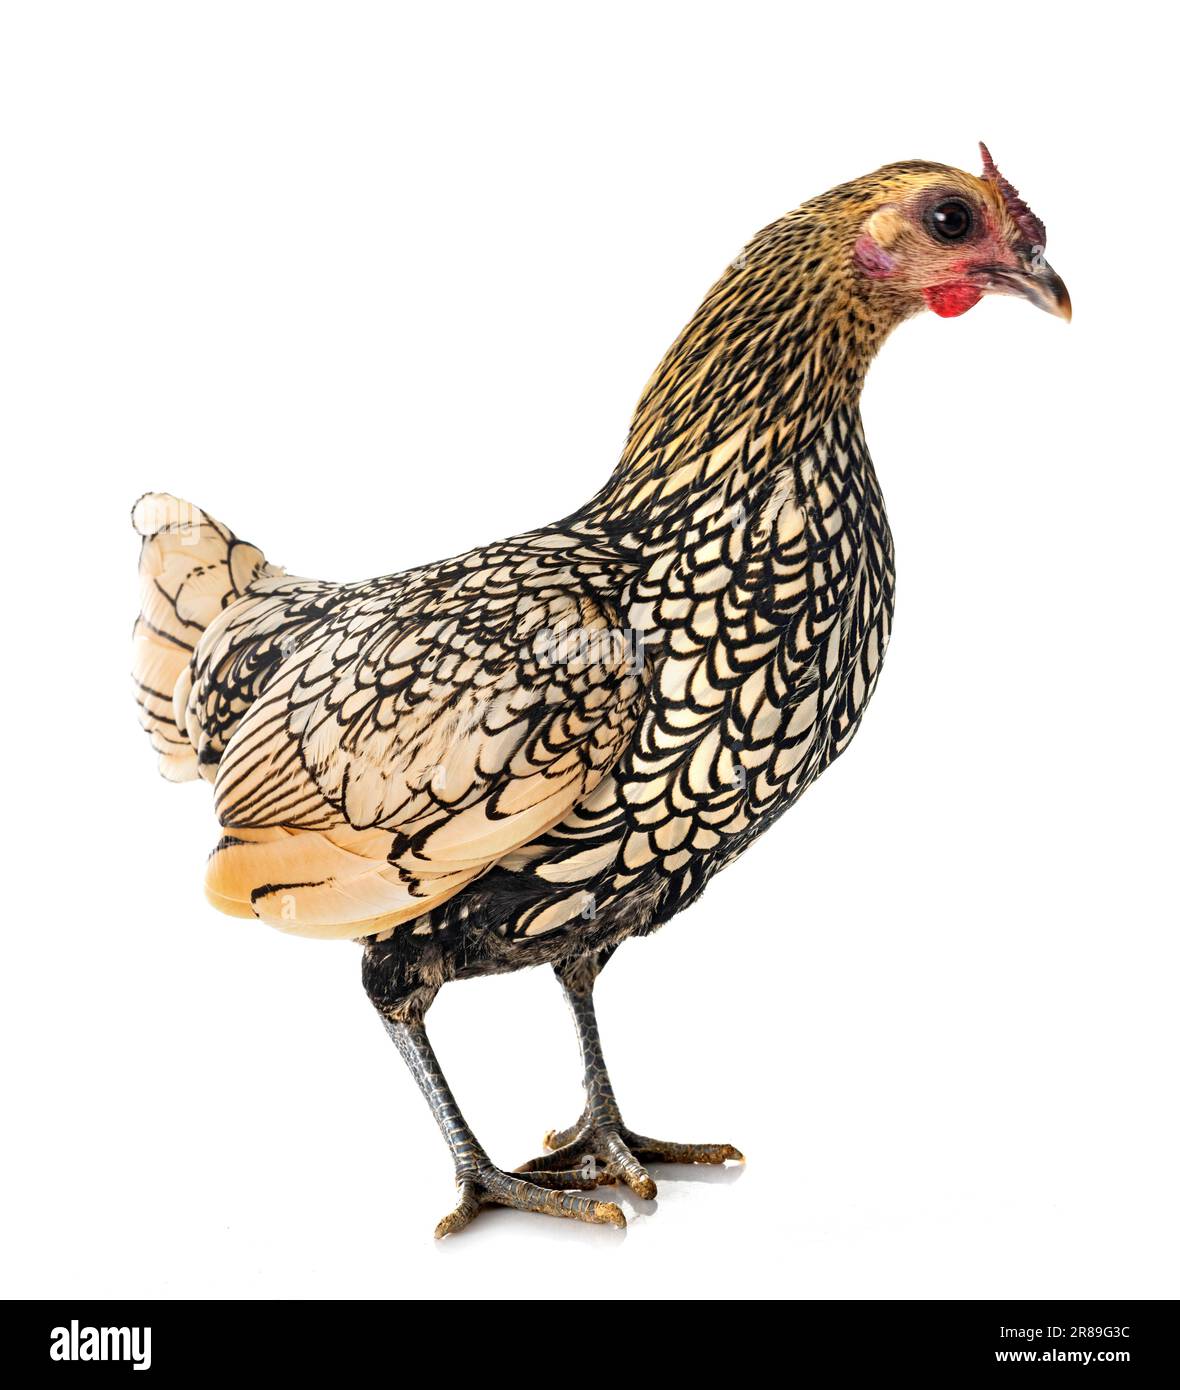 Sebright chicken in front of white background Stock Photo